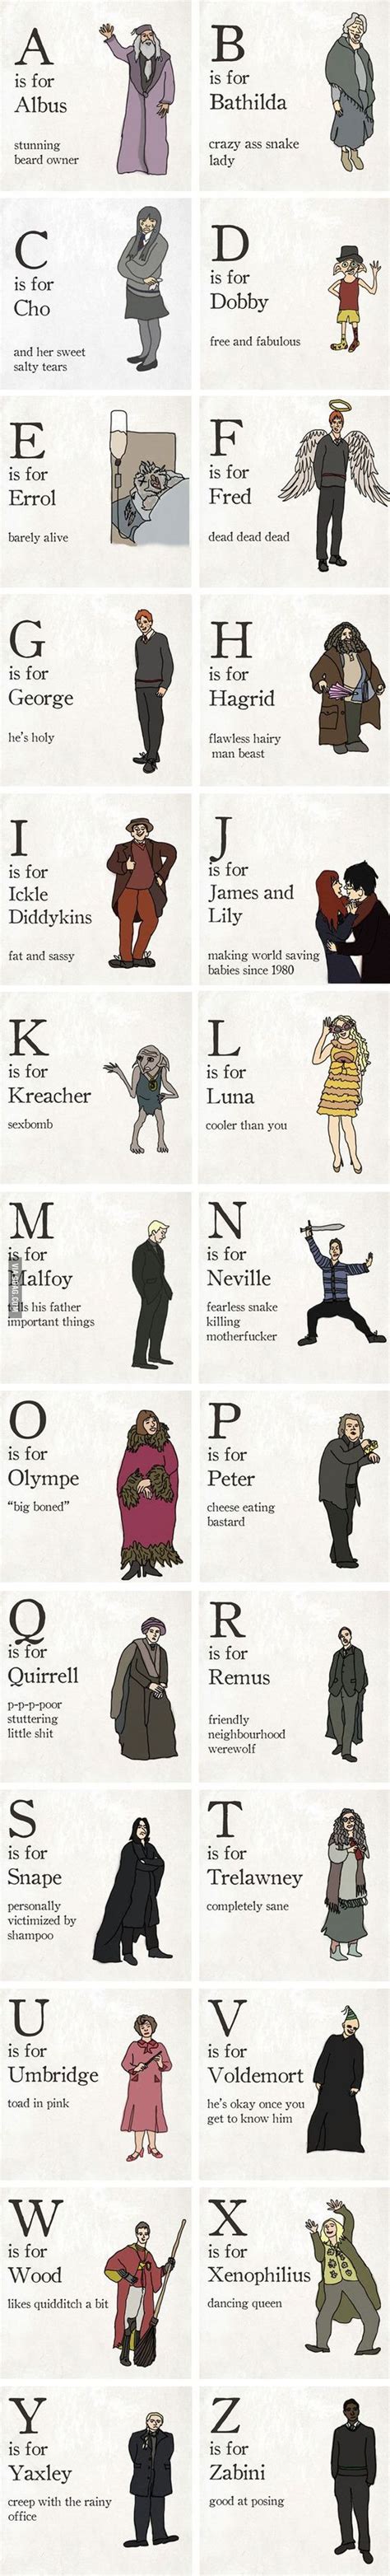 The Illustrated Alphabet Of Harry Potter Characters ...